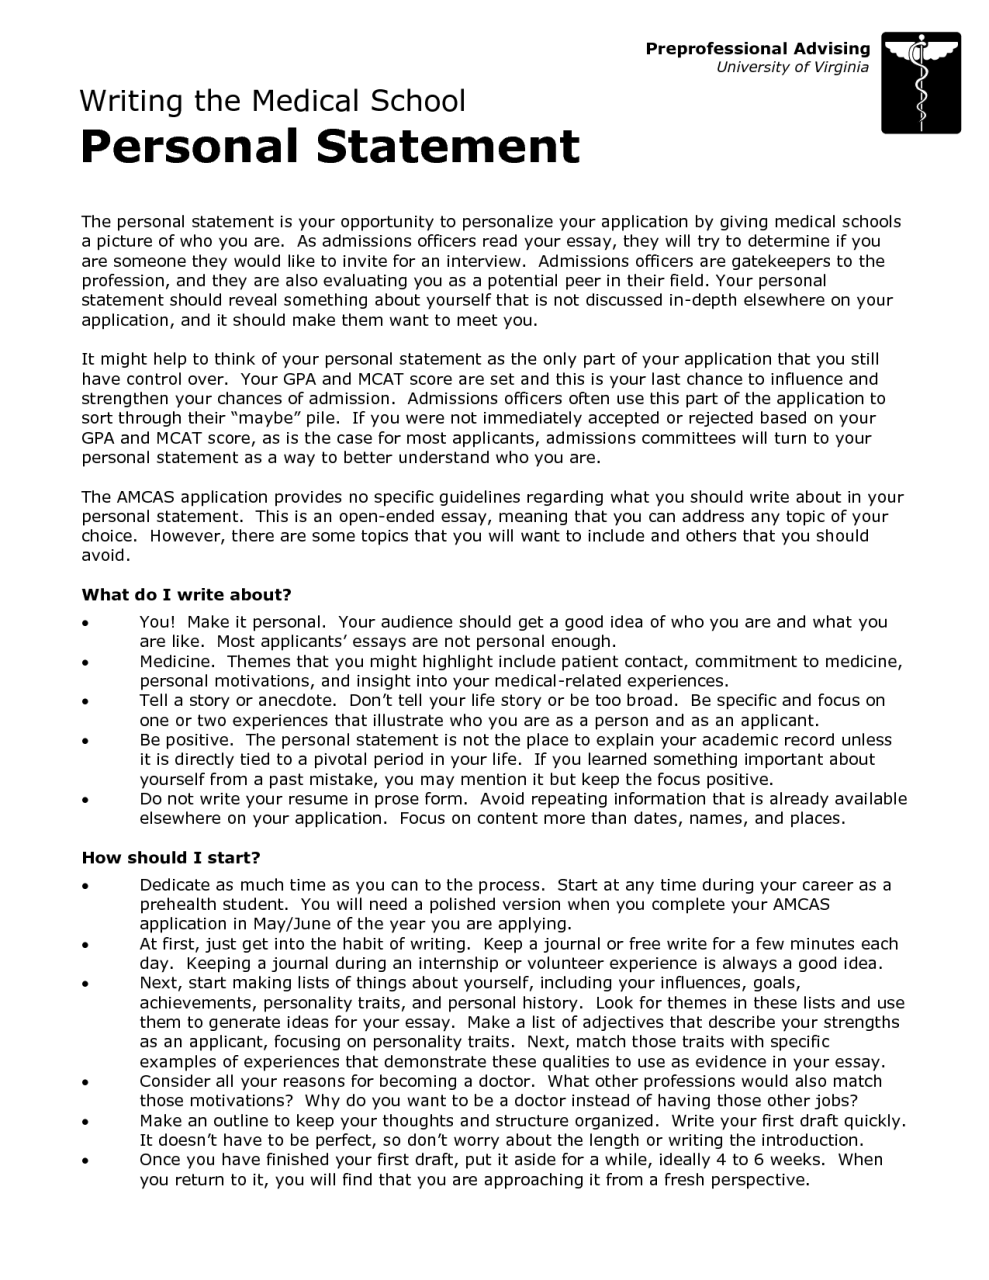 personal statement for college applications Personal statement